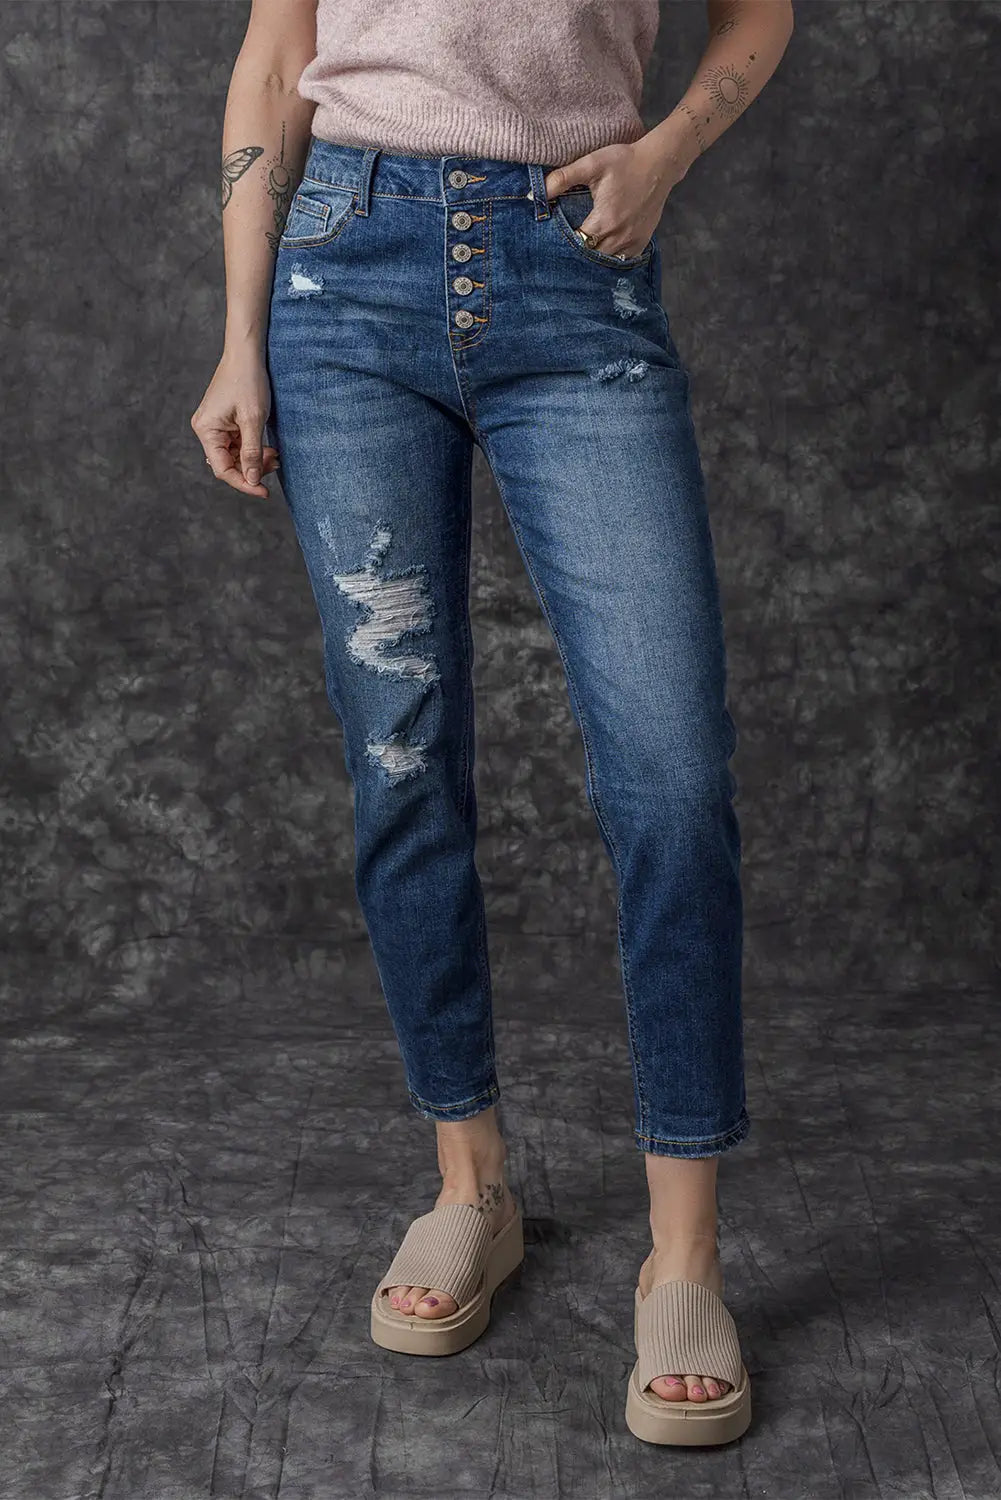 Blue distressed button fly high waist skinny jeans - bottoms